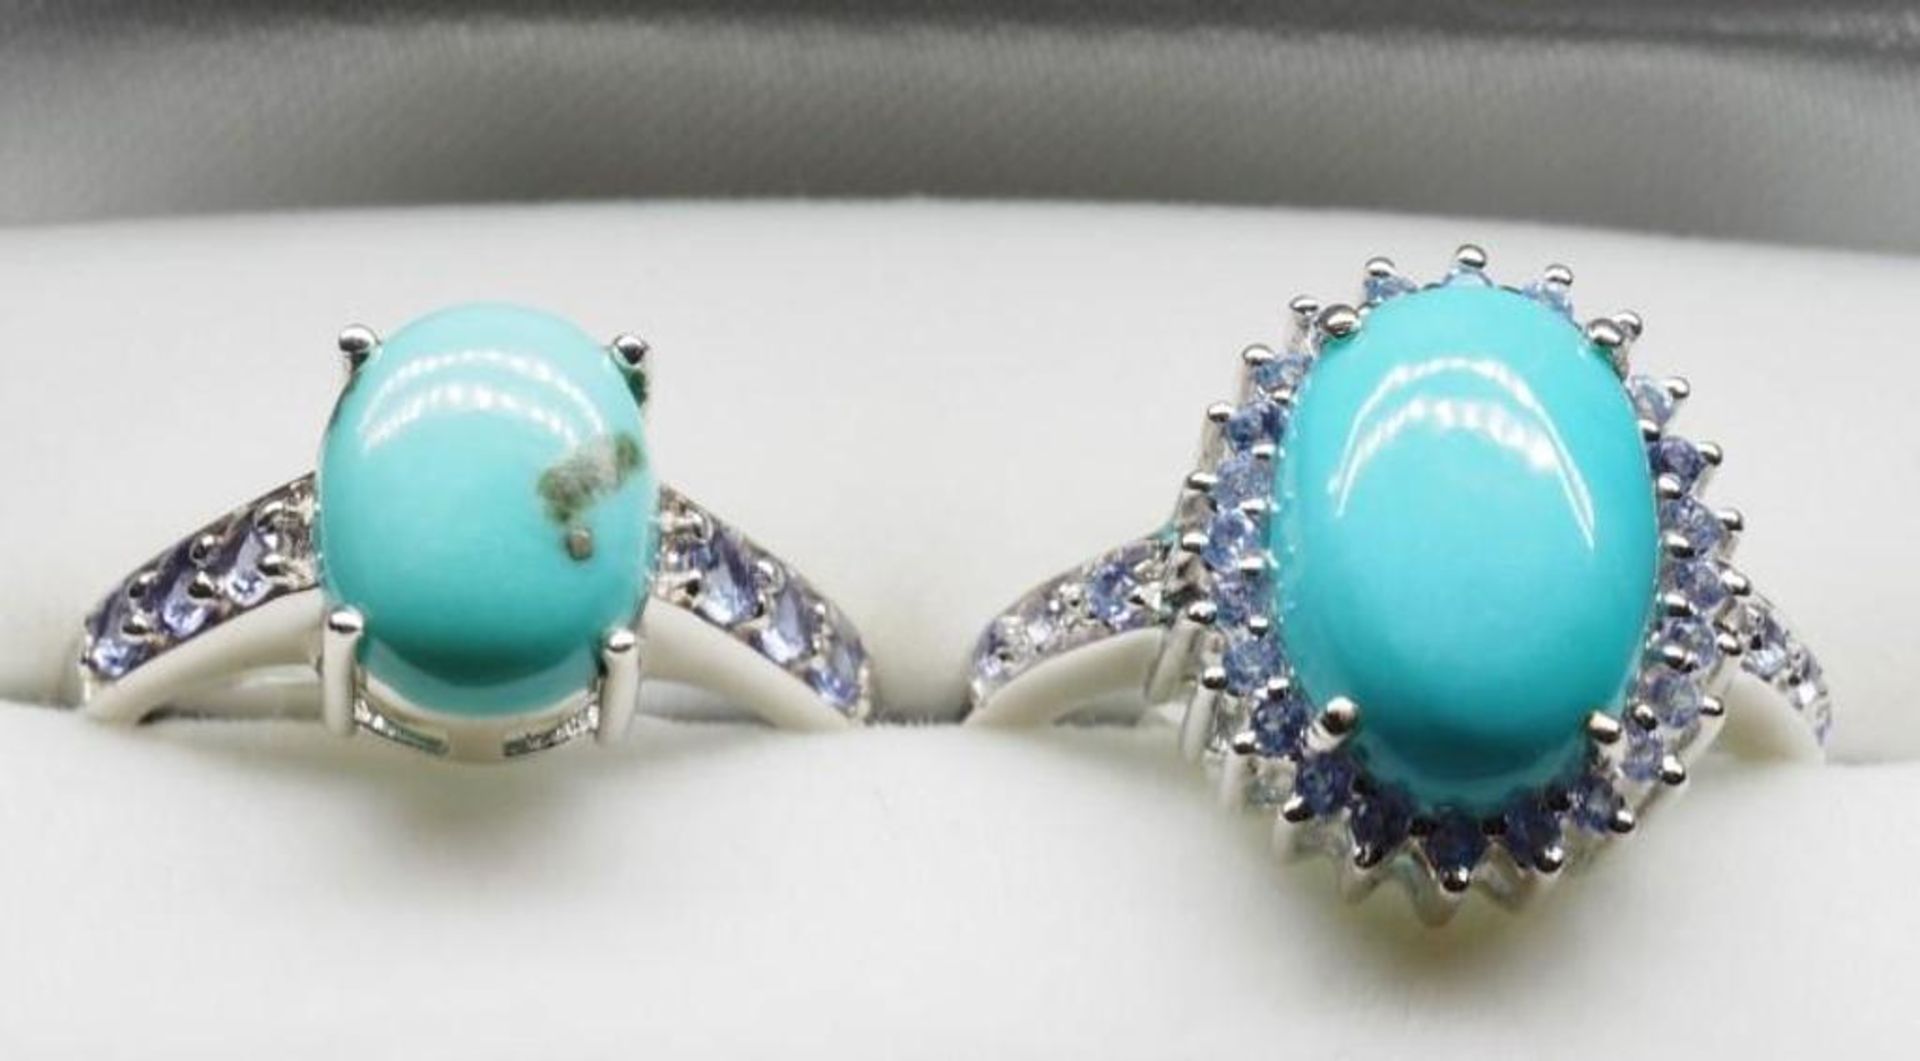 2 Sterling Silver Reconstructed Turquoise Tanzanite Rings Retail $350